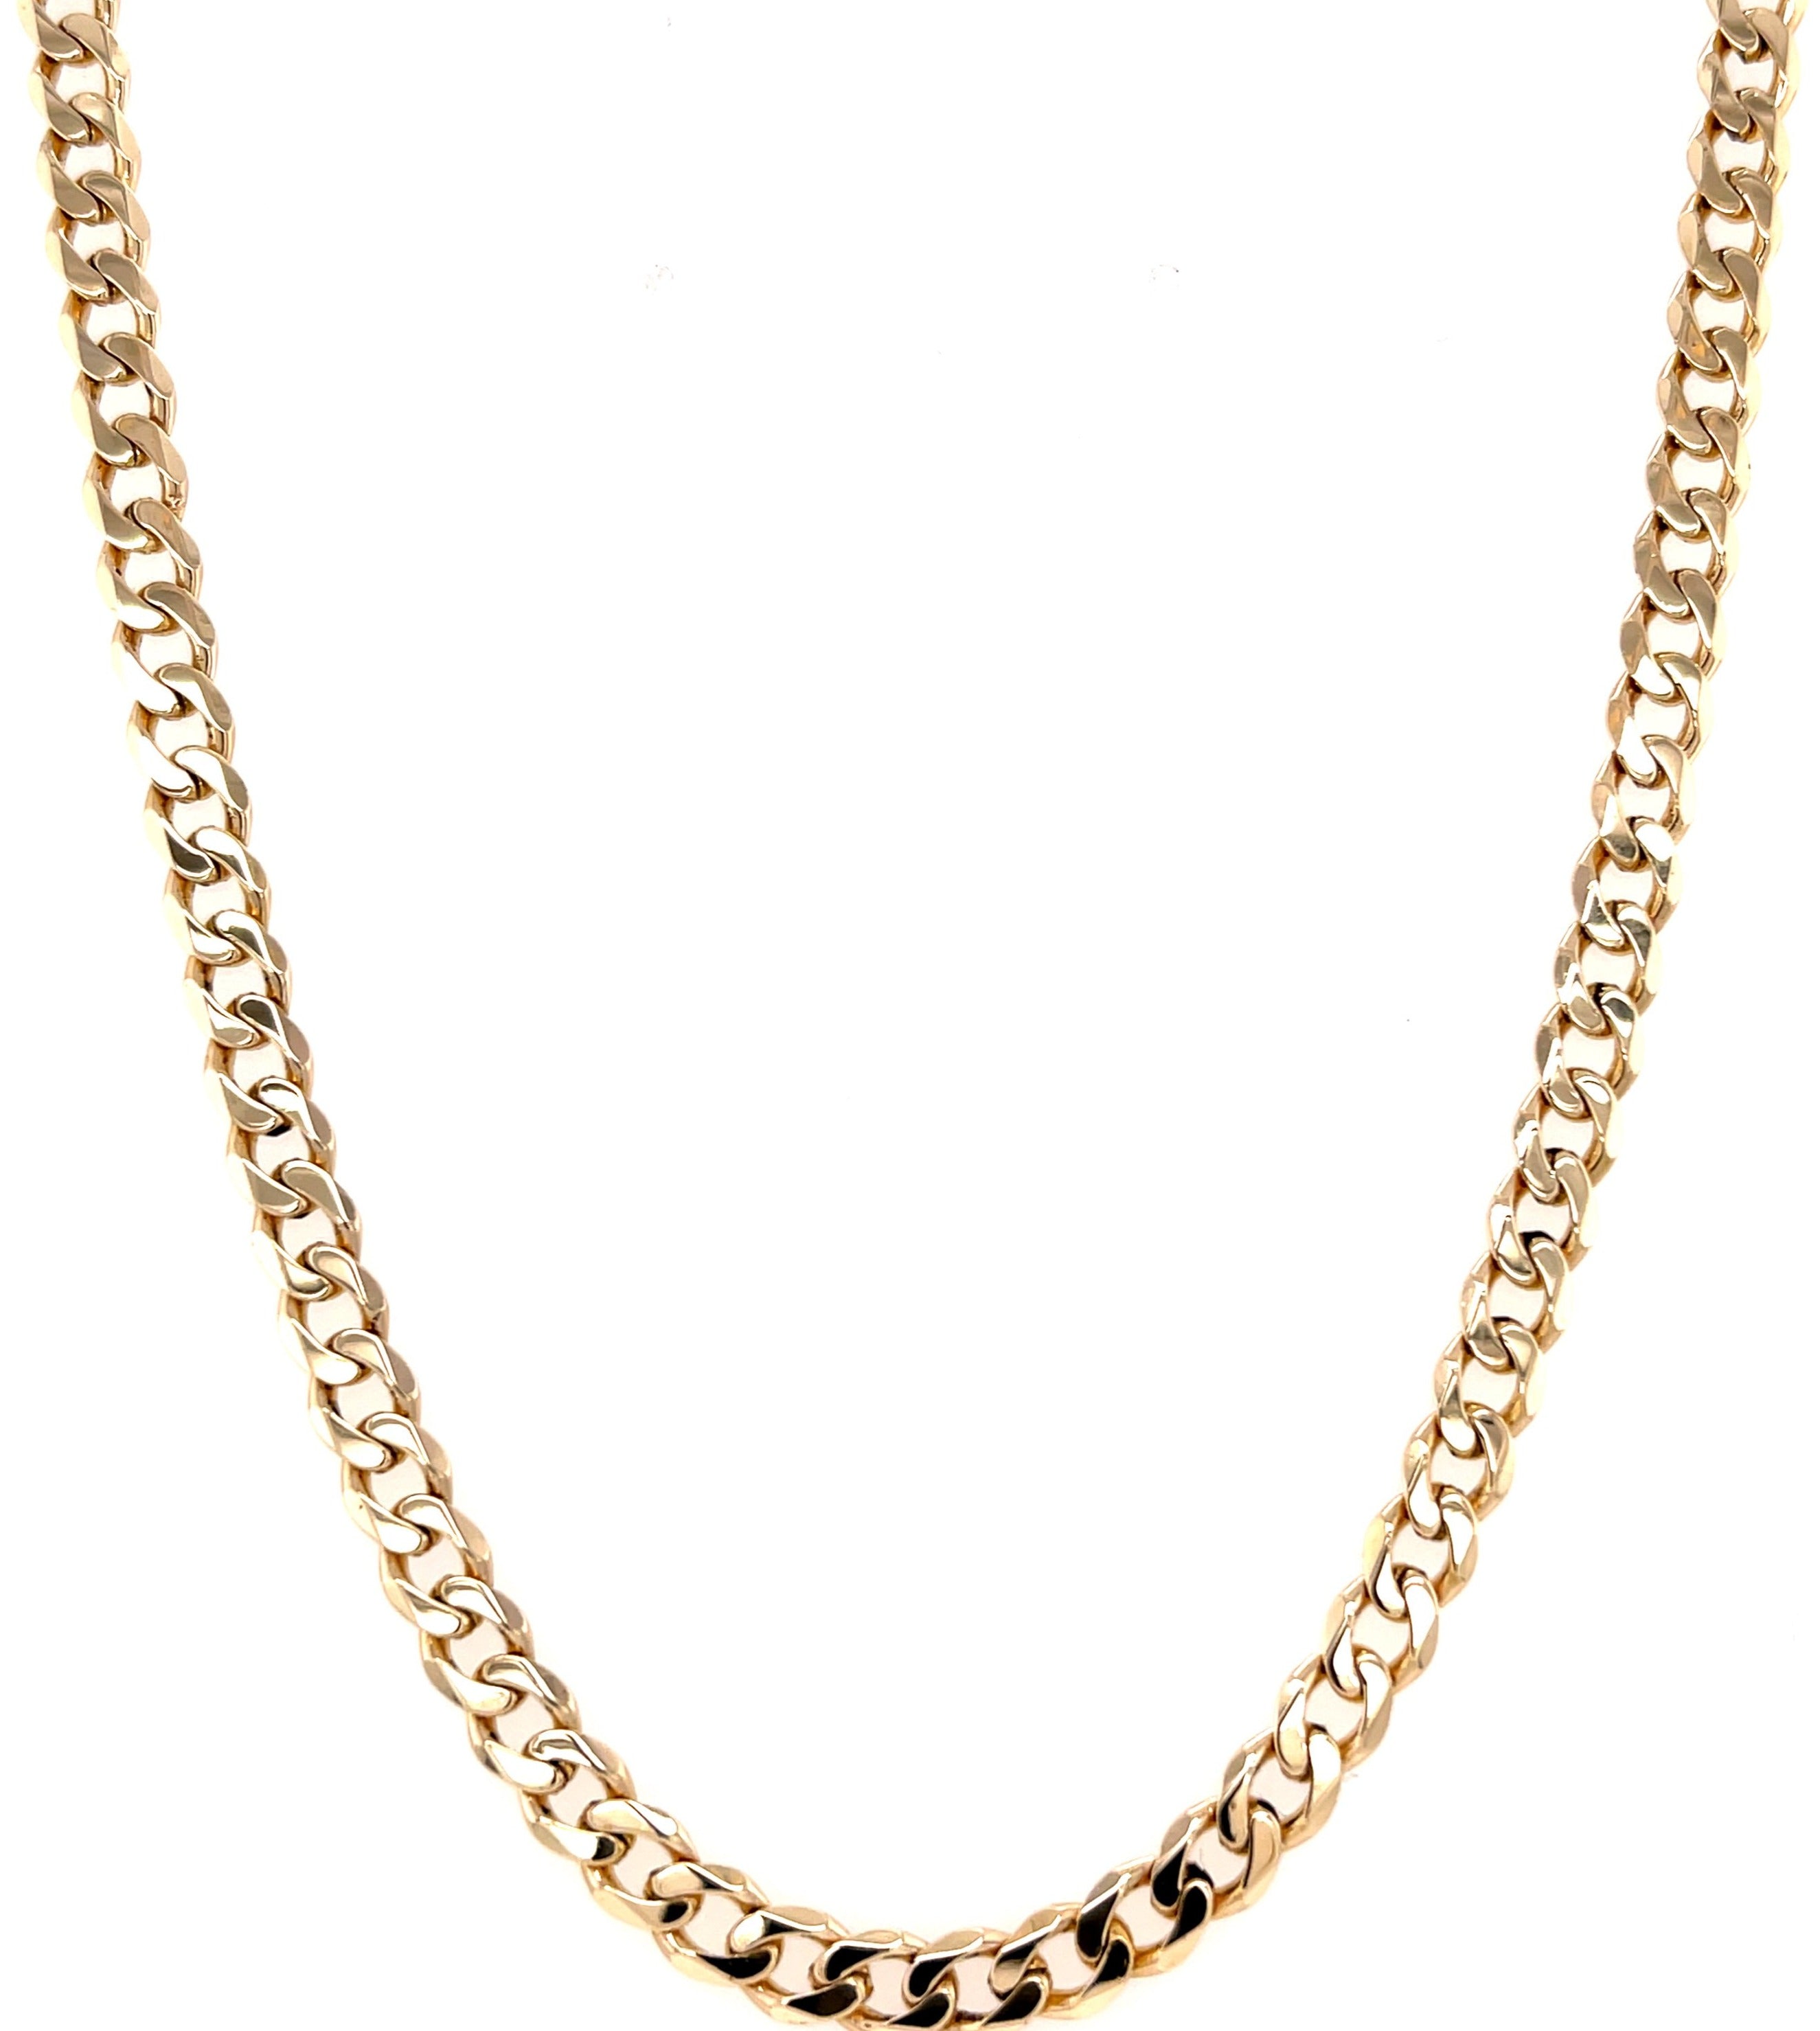 9ct Yellow Gold 30 Inch Curb Link Chain - 26.75g